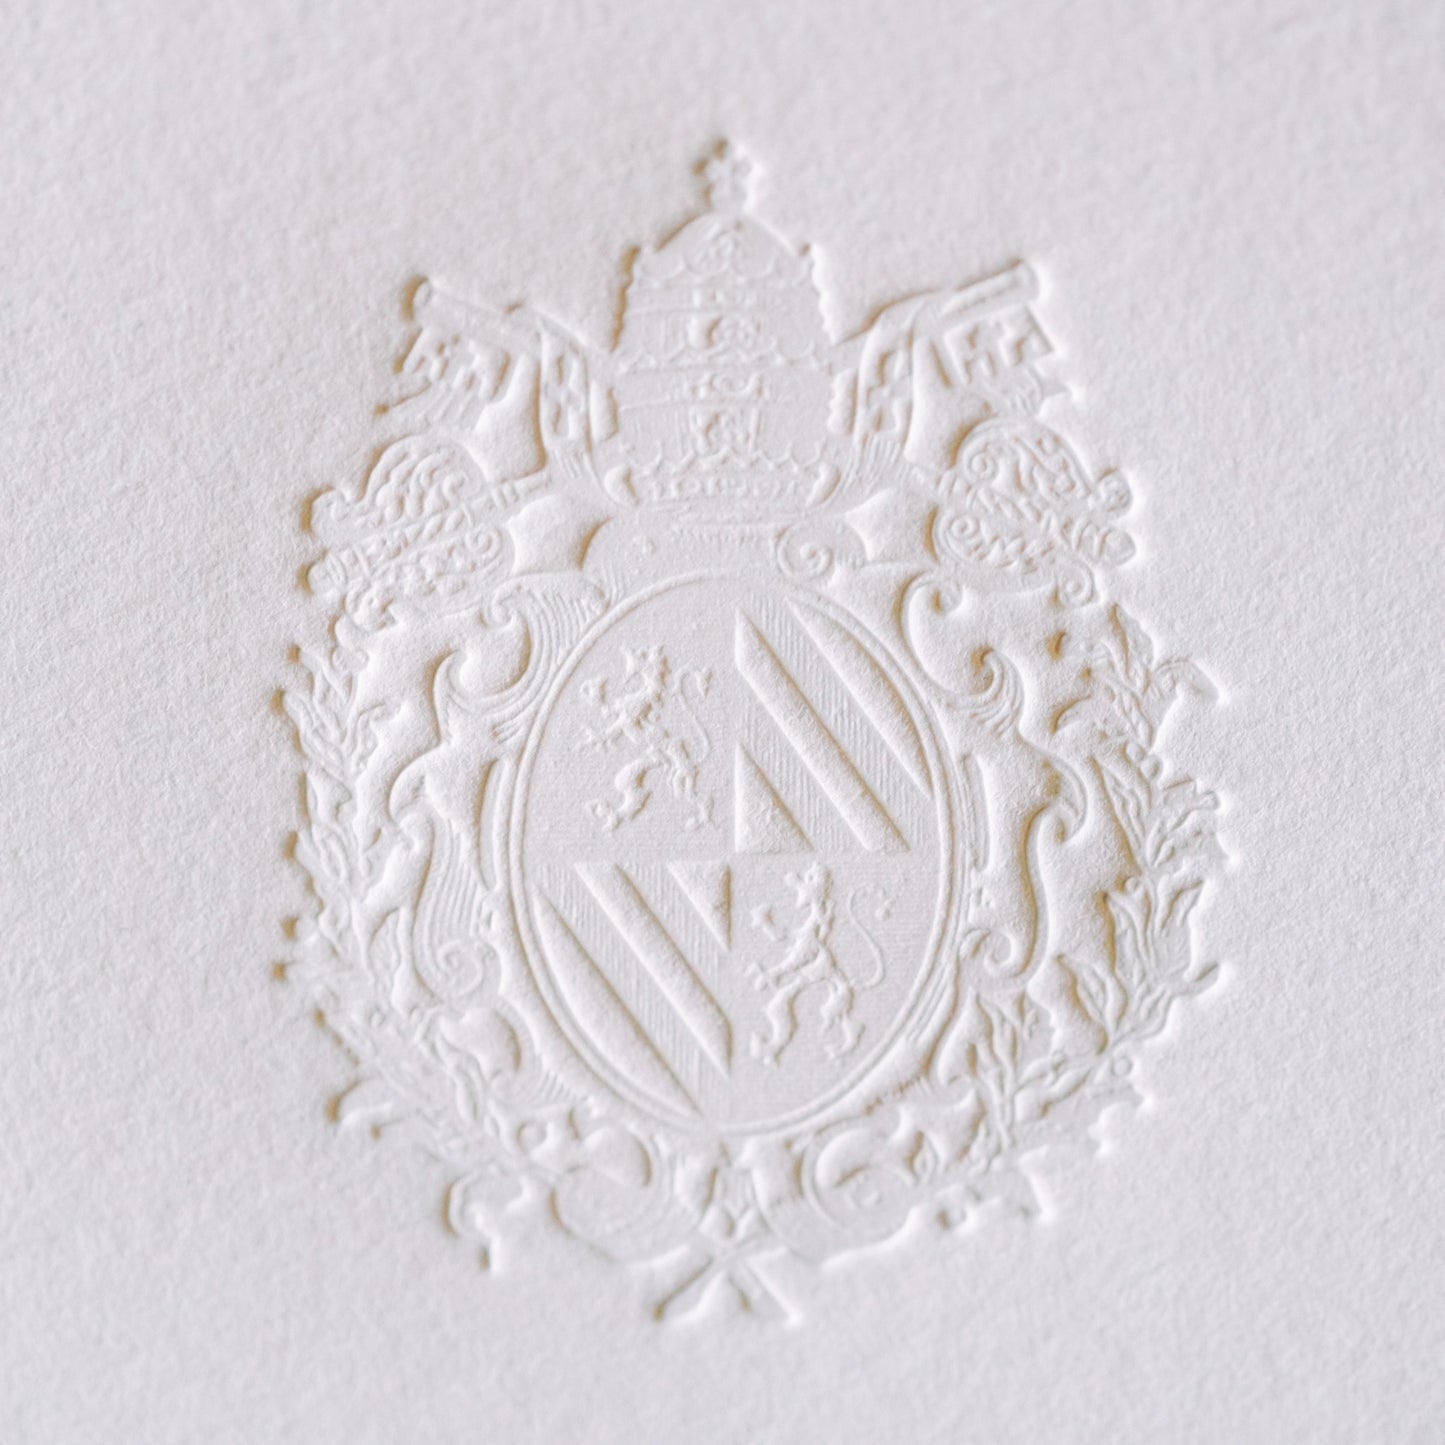 The Coat of Arms of the Catholic Church Letterpress Stationery Notecards